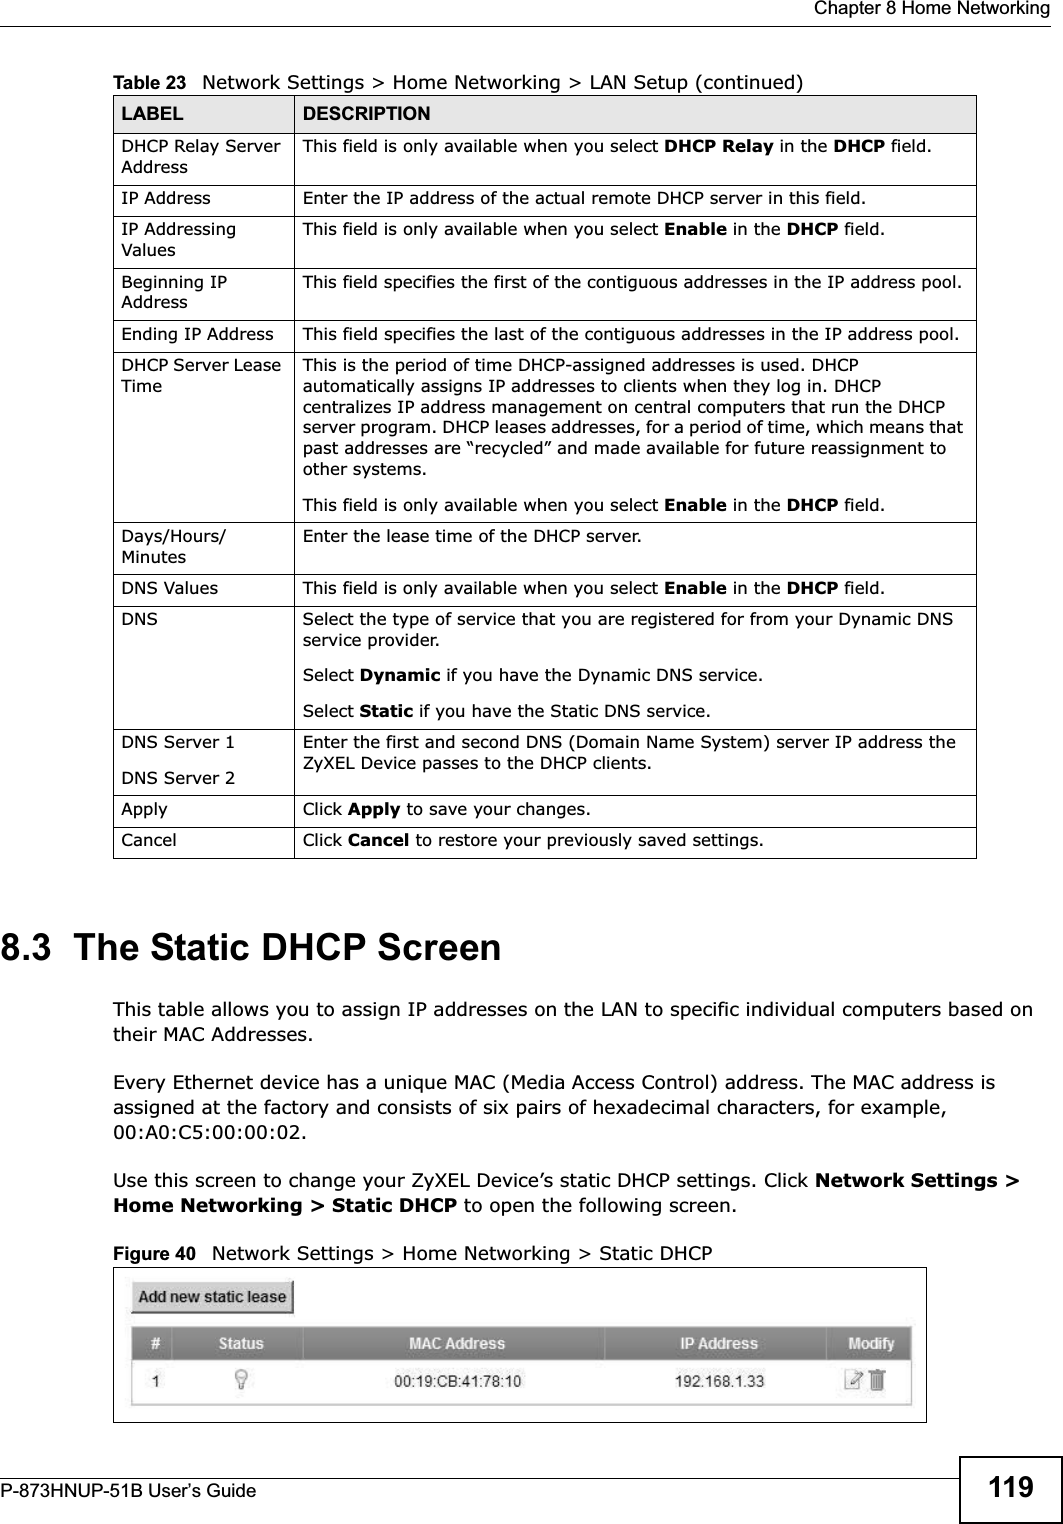  Chapter 8 Home NetworkingP-873HNUP-51B User’s Guide 1198.3  The Static DHCP ScreenThis table allows you to assign IP addresses on the LAN to specific individual computers based on their MAC Addresses. Every Ethernet device has a unique MAC (Media Access Control) address. The MAC address is assigned at the factory and consists of six pairs of hexadecimal characters, for example, 00:A0:C5:00:00:02.Use this screen to change your ZyXEL Device’s static DHCP settings. Click Network Settings &gt; Home Networking &gt; Static DHCP to open the following screen.Figure 40   Network Settings &gt; Home Networking &gt; Static DHCP DHCP Relay Server AddressThis field is only available when you select DHCP Relay in the DHCP field.IP Address Enter the IP address of the actual remote DHCP server in this field.IP Addressing ValuesThis field is only available when you select Enable in the DHCP field.Beginning IP AddressThis field specifies the first of the contiguous addresses in the IP address pool.Ending IP Address This field specifies the last of the contiguous addresses in the IP address pool.DHCP Server Lease TimeThis is the period of time DHCP-assigned addresses is used. DHCP automatically assigns IP addresses to clients when they log in. DHCP centralizes IP address management on central computers that run the DHCP server program. DHCP leases addresses, for a period of time, which means that past addresses are “recycled” and made available for future reassignment to other systems.This field is only available when you select Enable in the DHCP field.Days/Hours/MinutesEnter the lease time of the DHCP server.DNS Values This field is only available when you select Enable in the DHCP field.DNS Select the type of service that you are registered for from your Dynamic DNS service provider. Select Dynamic if you have the Dynamic DNS service. Select Static if you have the Static DNS service. DNS Server 1DNS Server 2Enter the first and second DNS (Domain Name System) server IP address the ZyXEL Device passes to the DHCP clients. Apply Click Apply to save your changes.Cancel Click Cancel to restore your previously saved settings.Table 23   Network Settings &gt; Home Networking &gt; LAN Setup (continued)LABEL DESCRIPTION